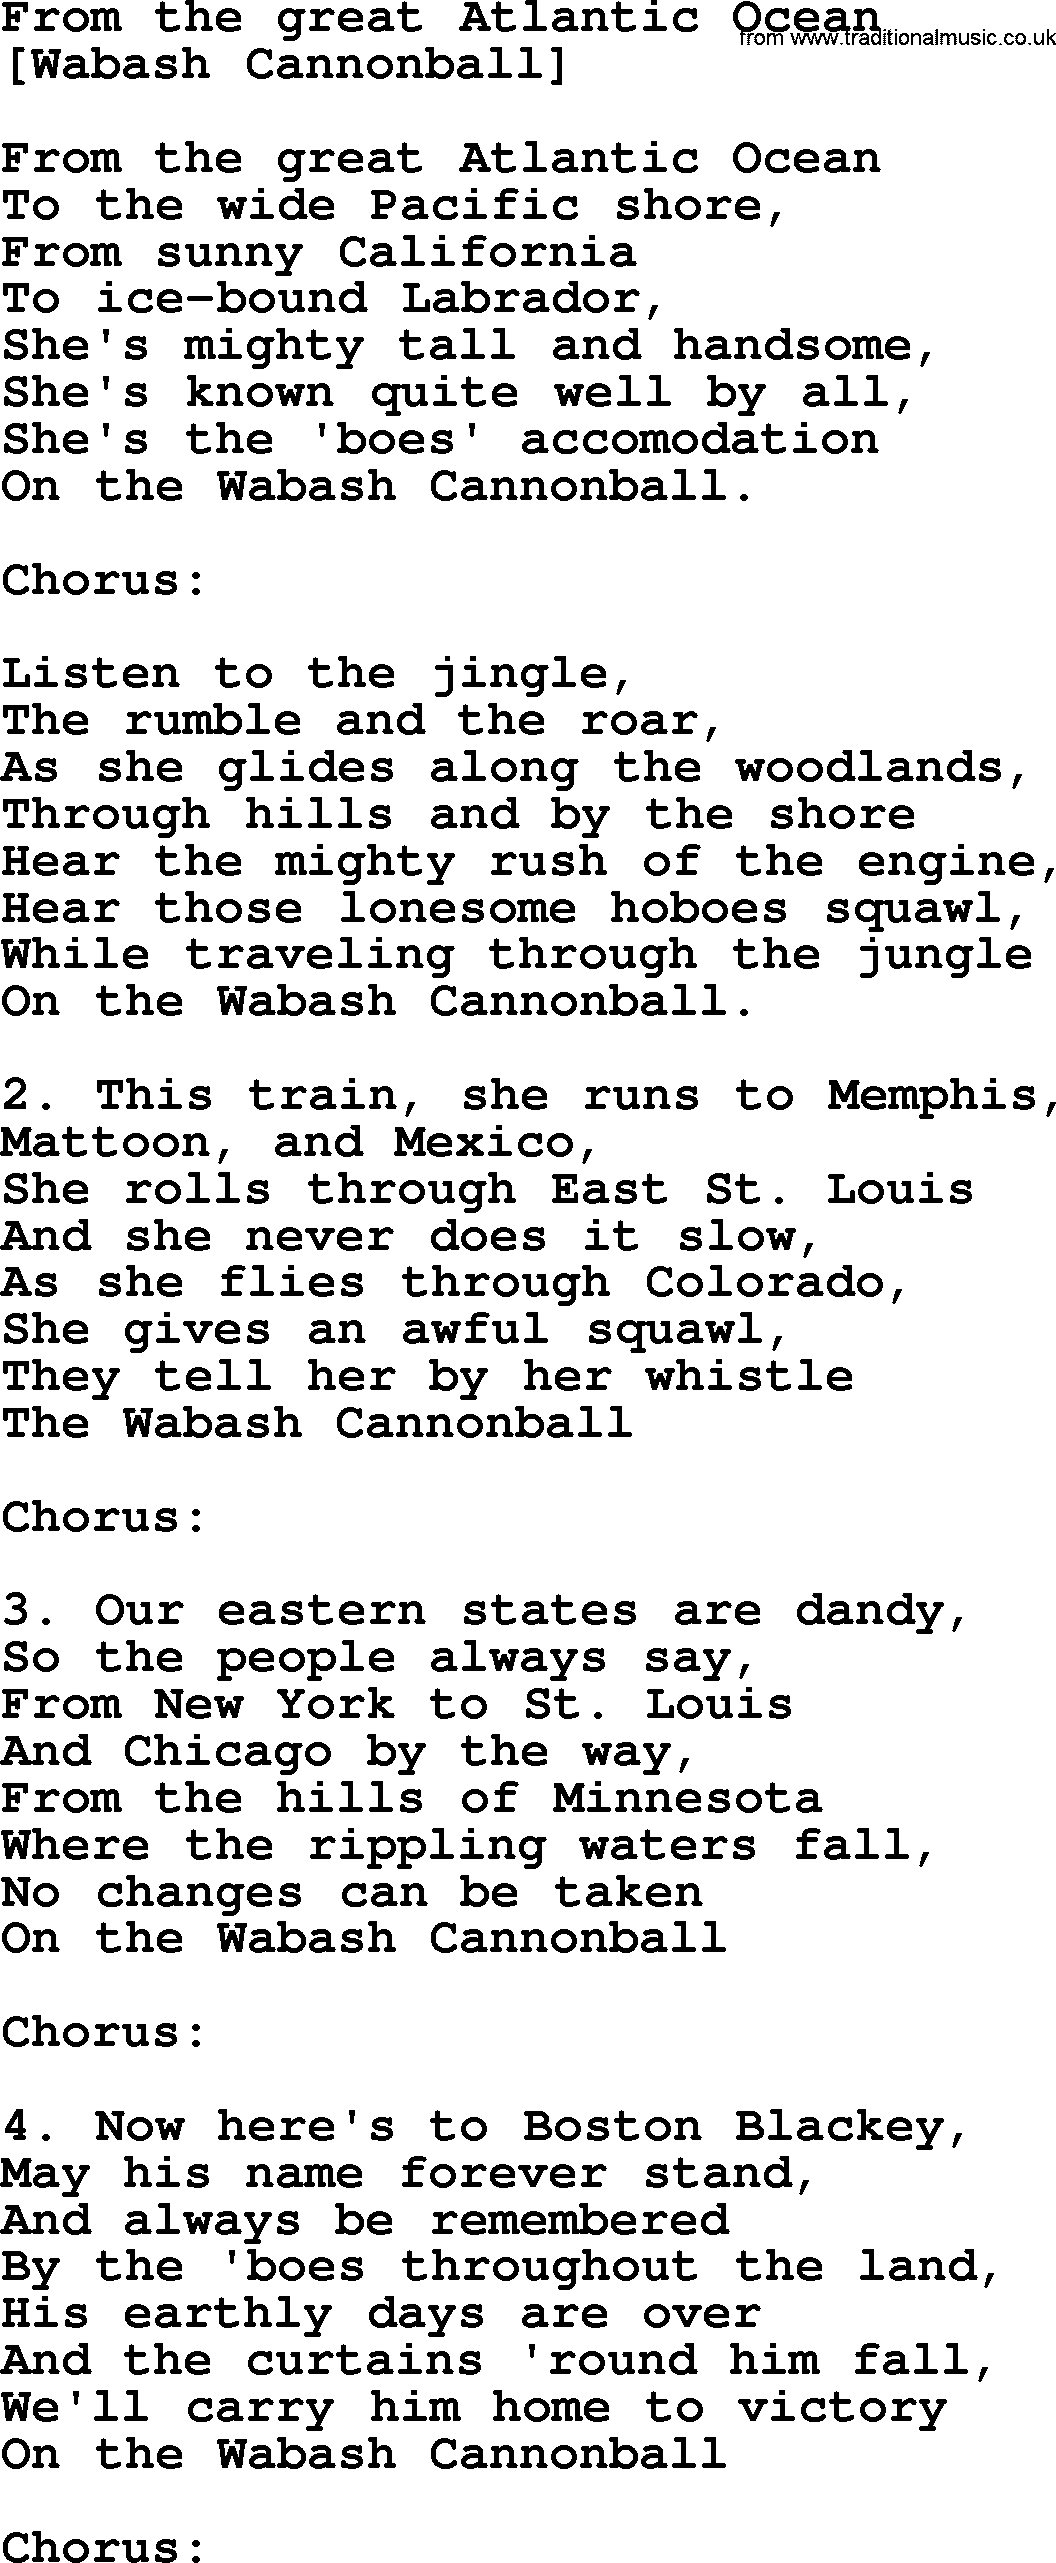 Old American Song: From The Great Atlantic Ocean, lyrics